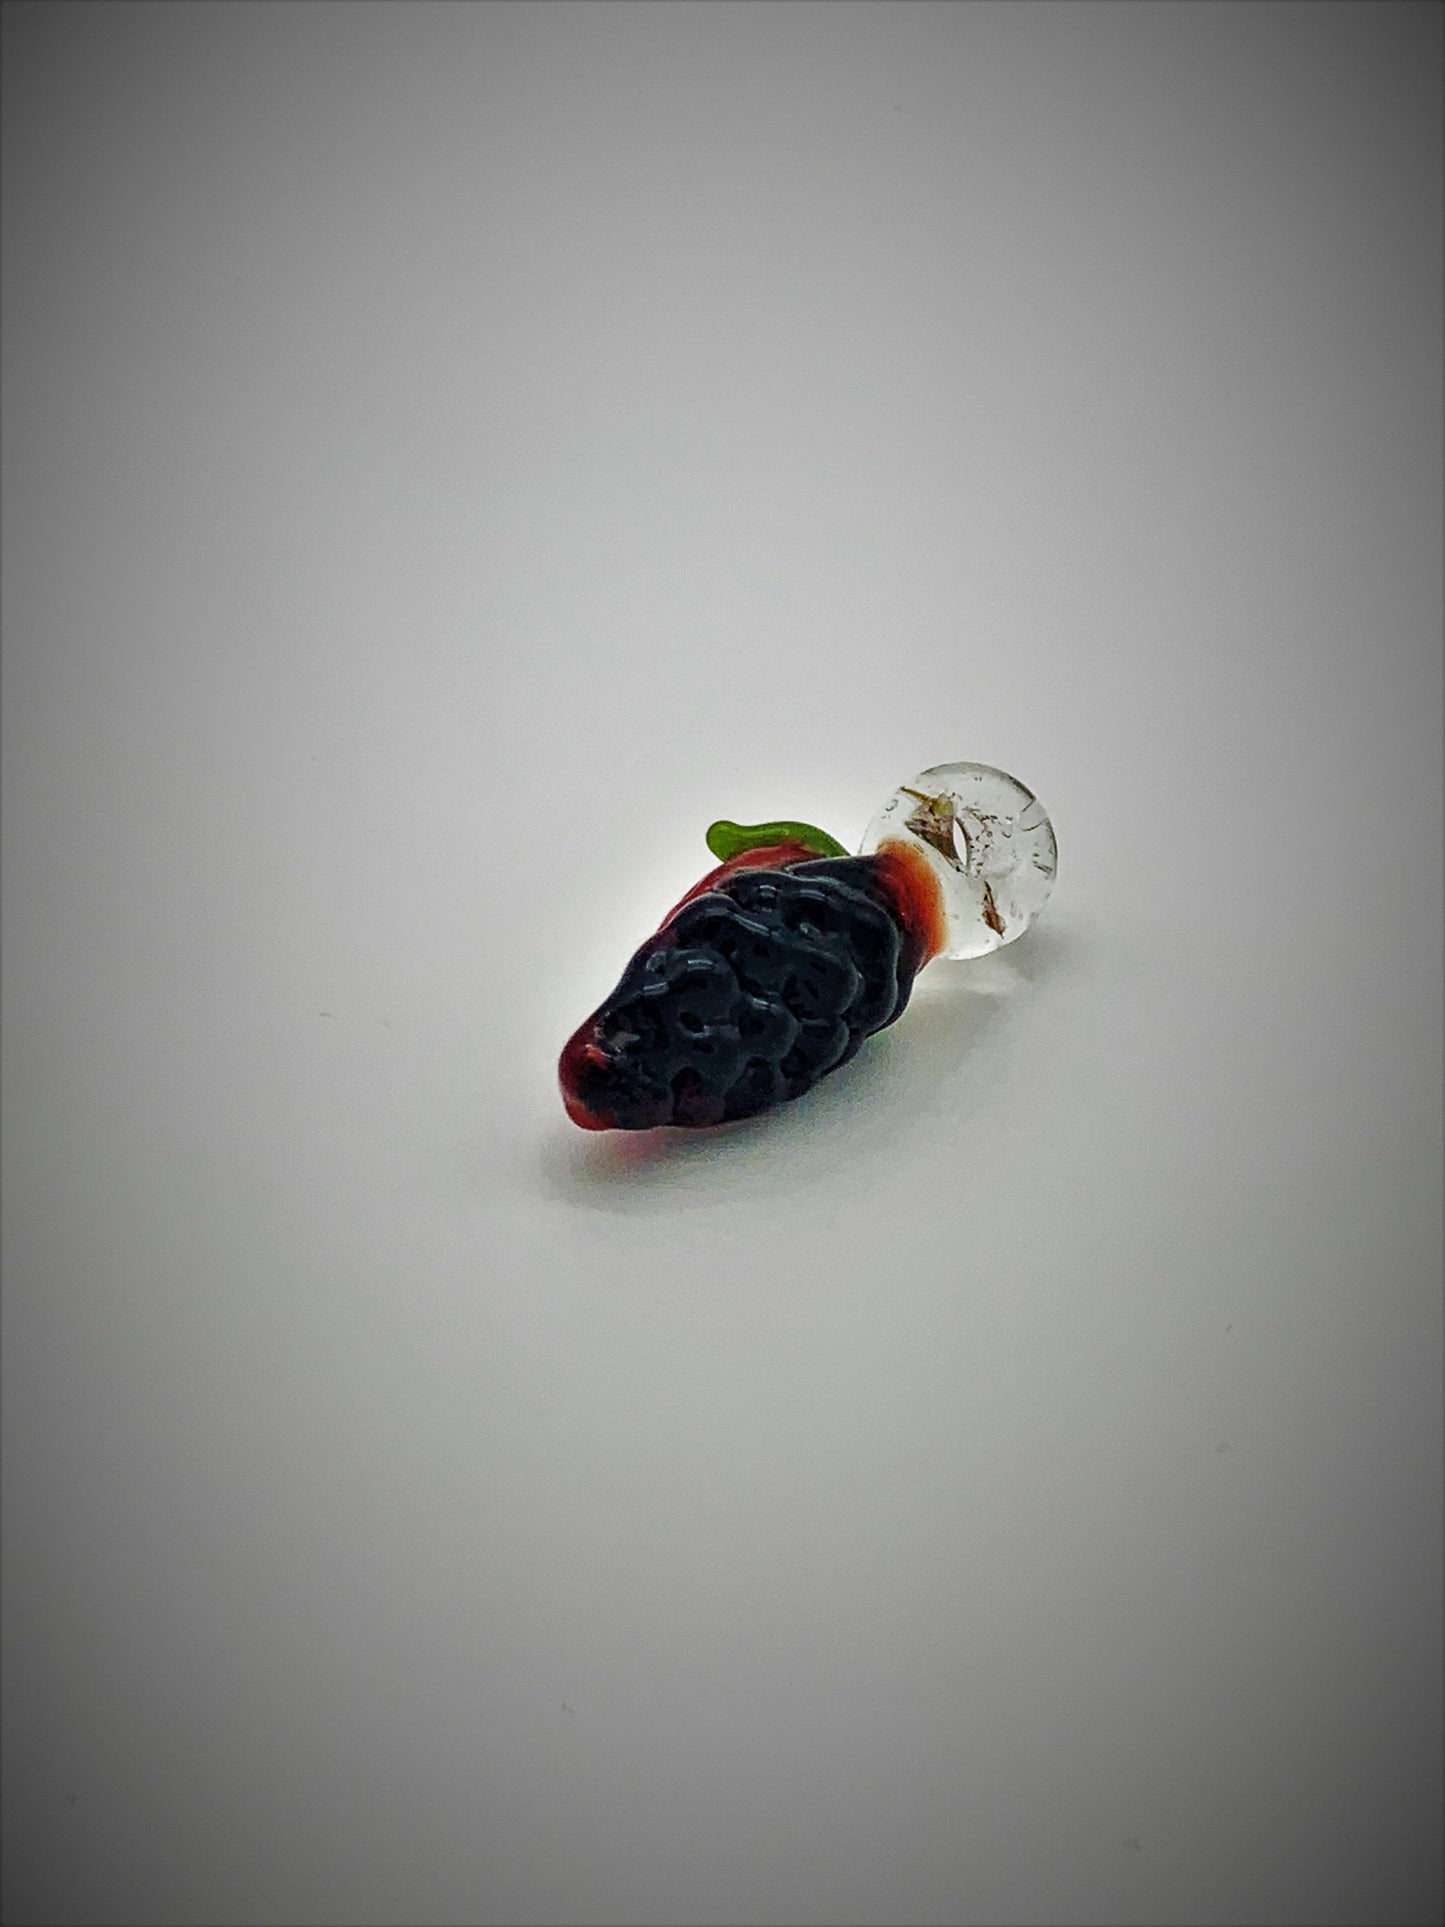 FrankenBerry Strawberry and Blackberry Mashup Combined Borosilicate Glass Pendant with UV Bail / Loop